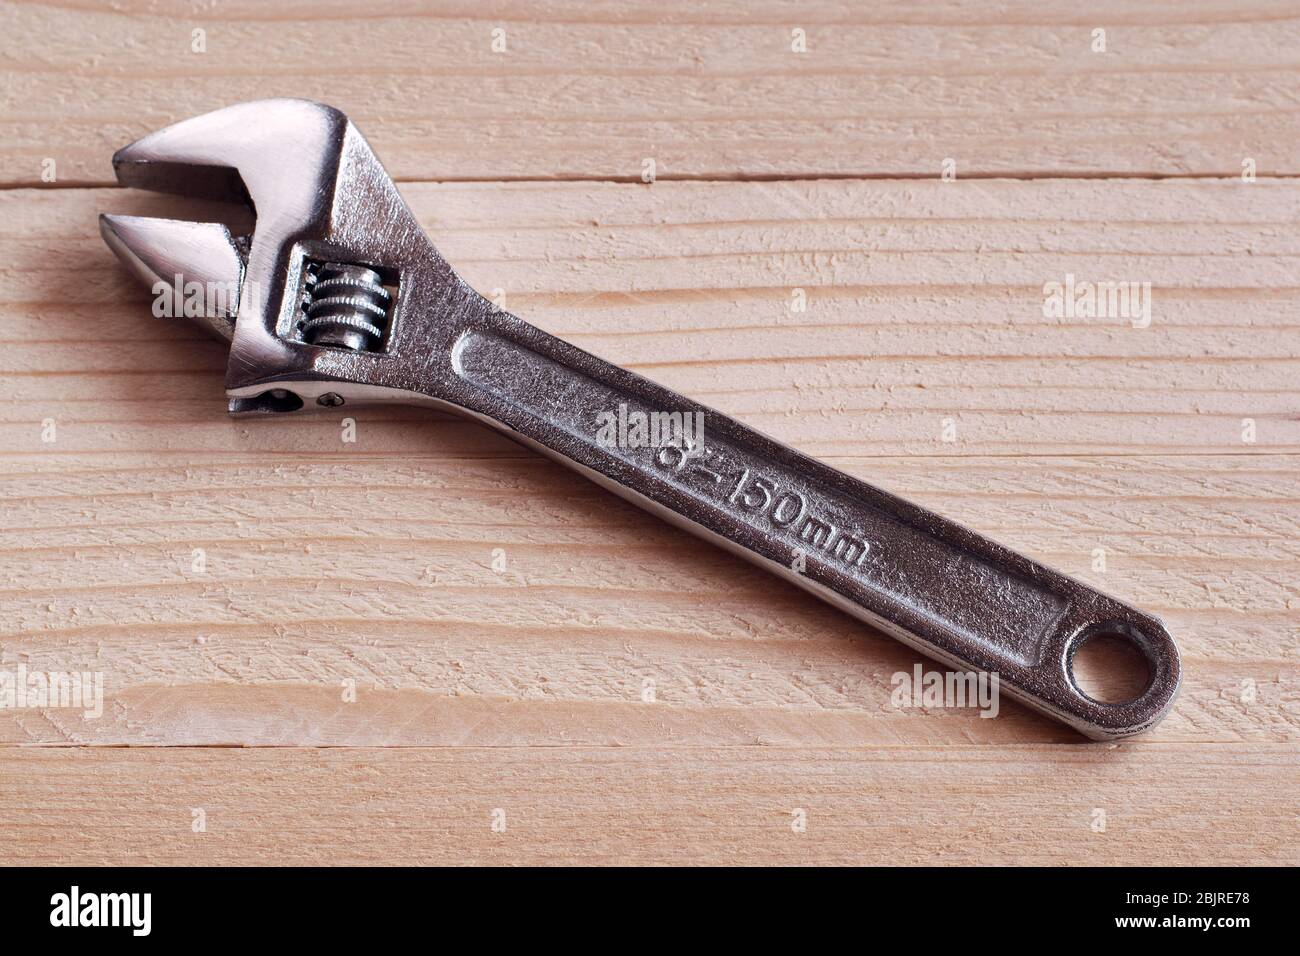 Chrome-plated adjustable wrench on a wooden background Stock Photo